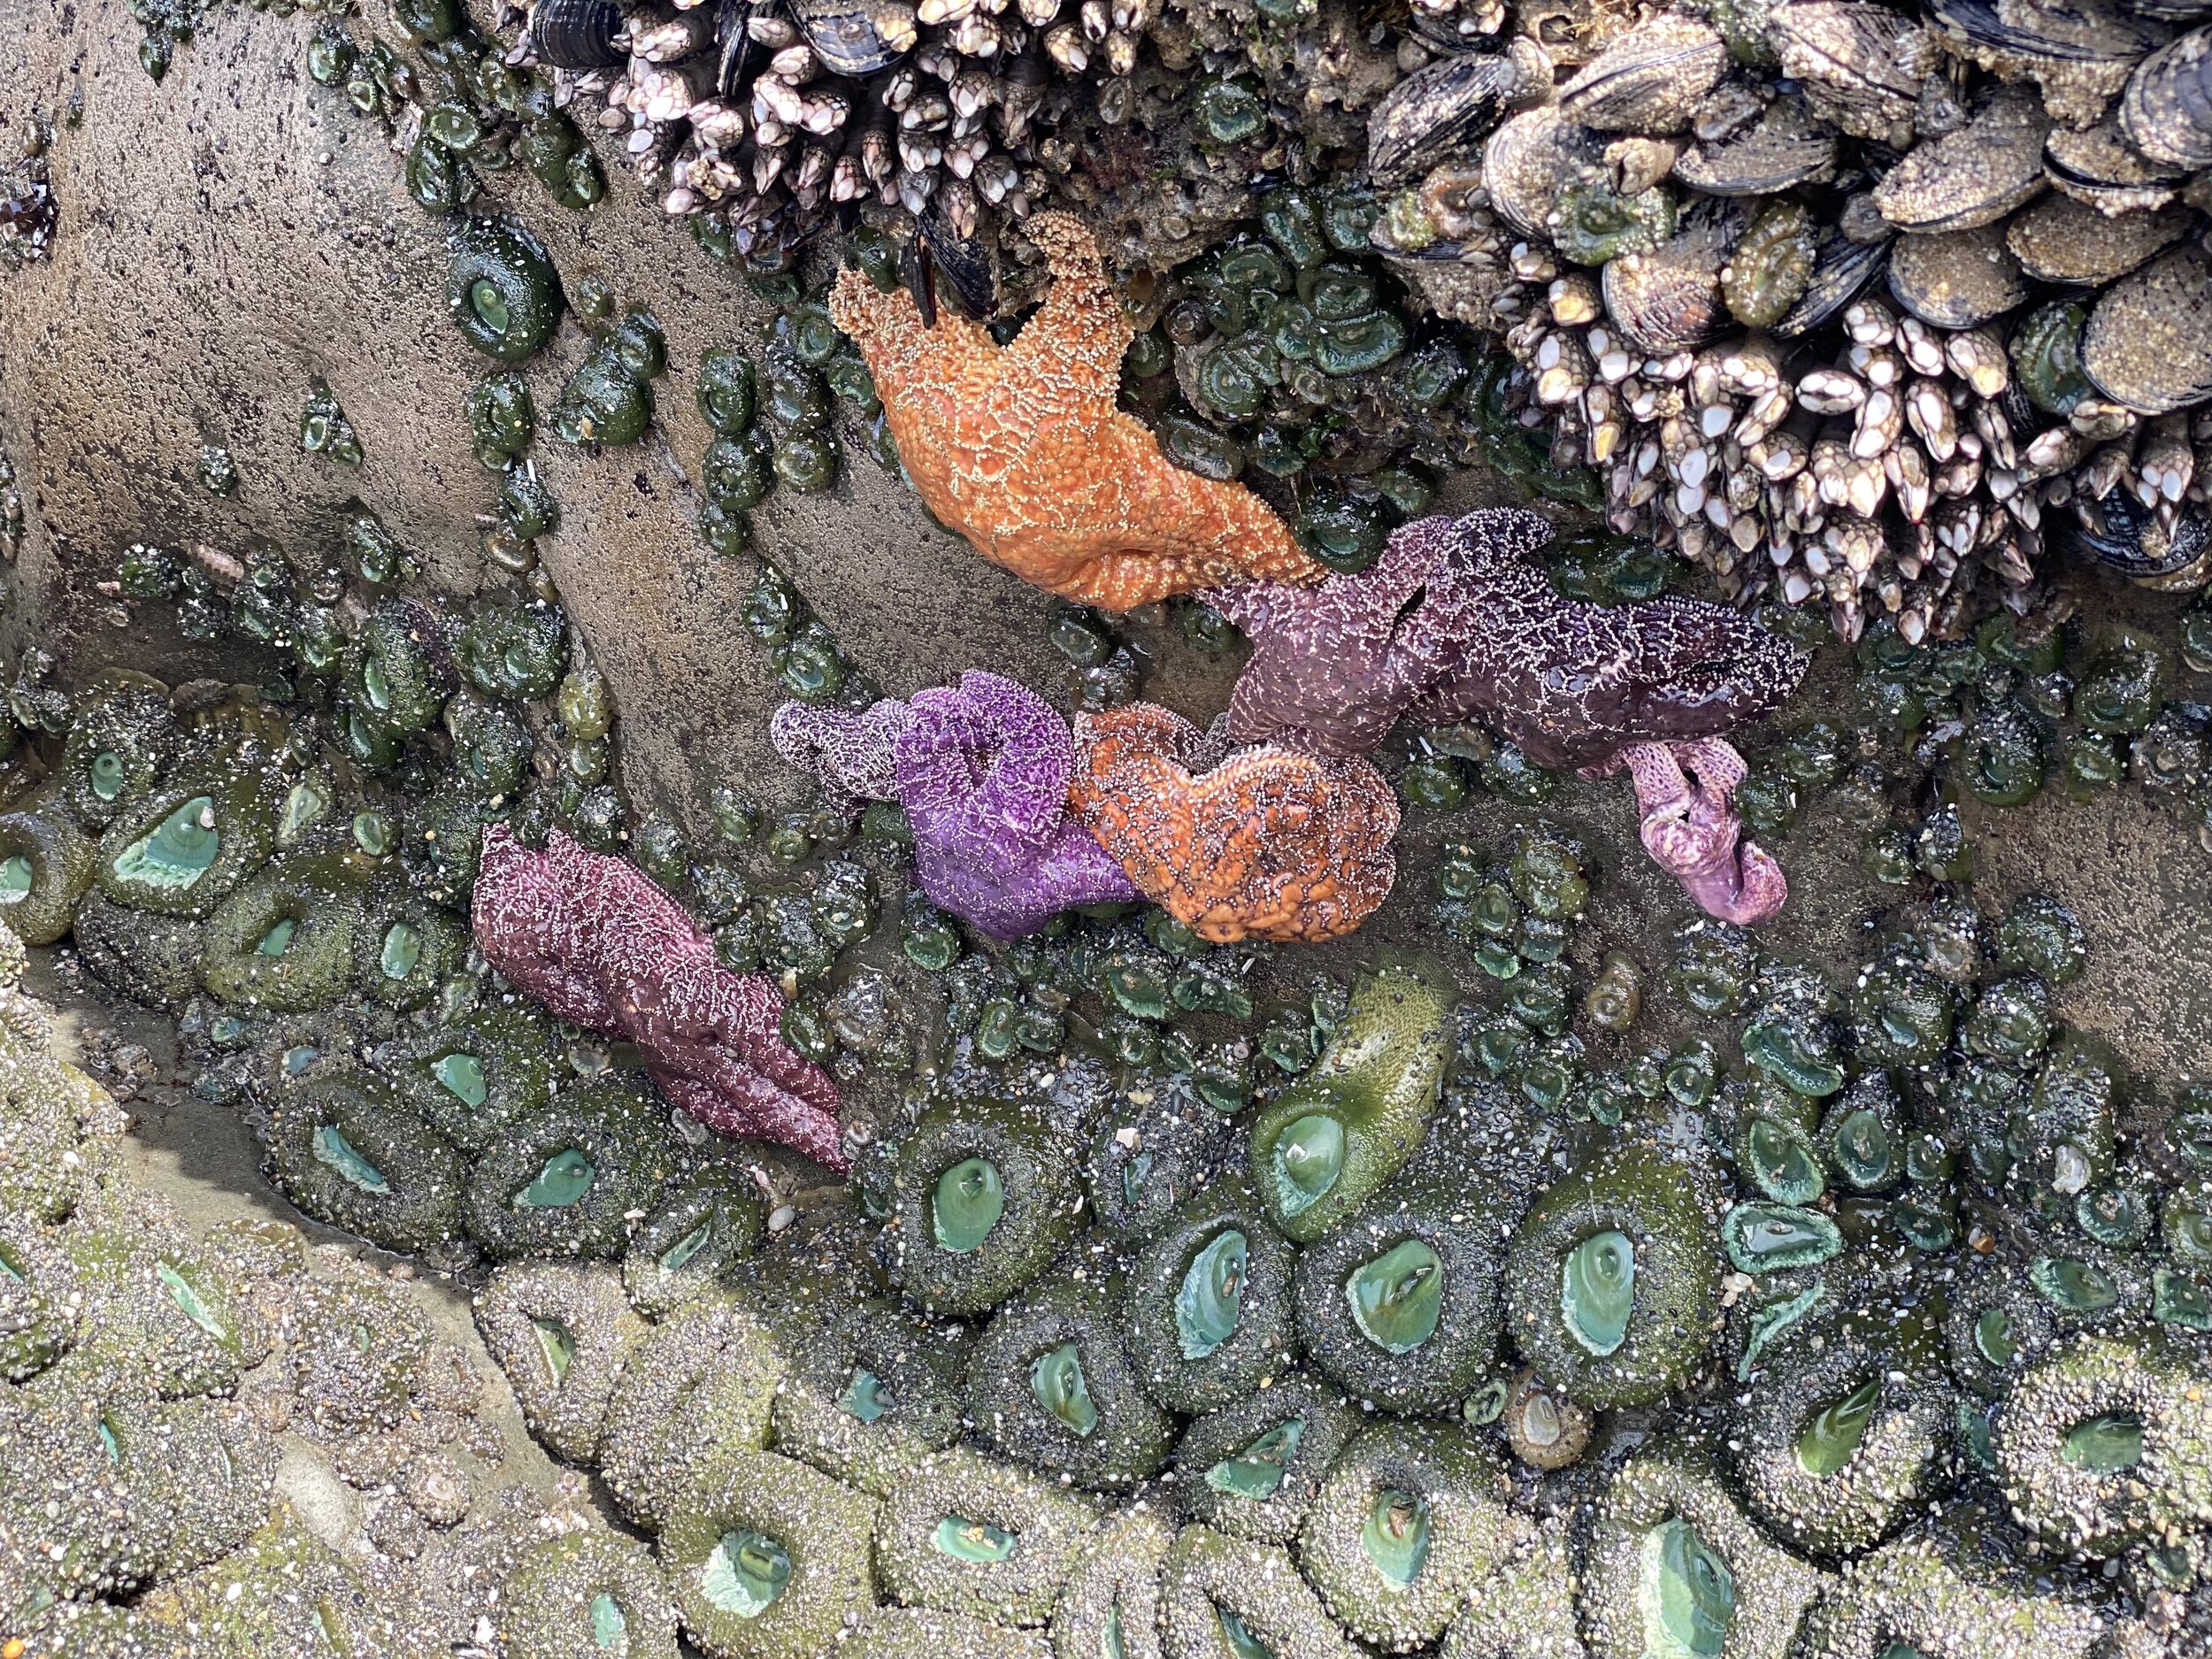 A colorful collection of purple and ochre sea stars on Beach 4.  Photo by Karen Boudreaux, June 16, 2021